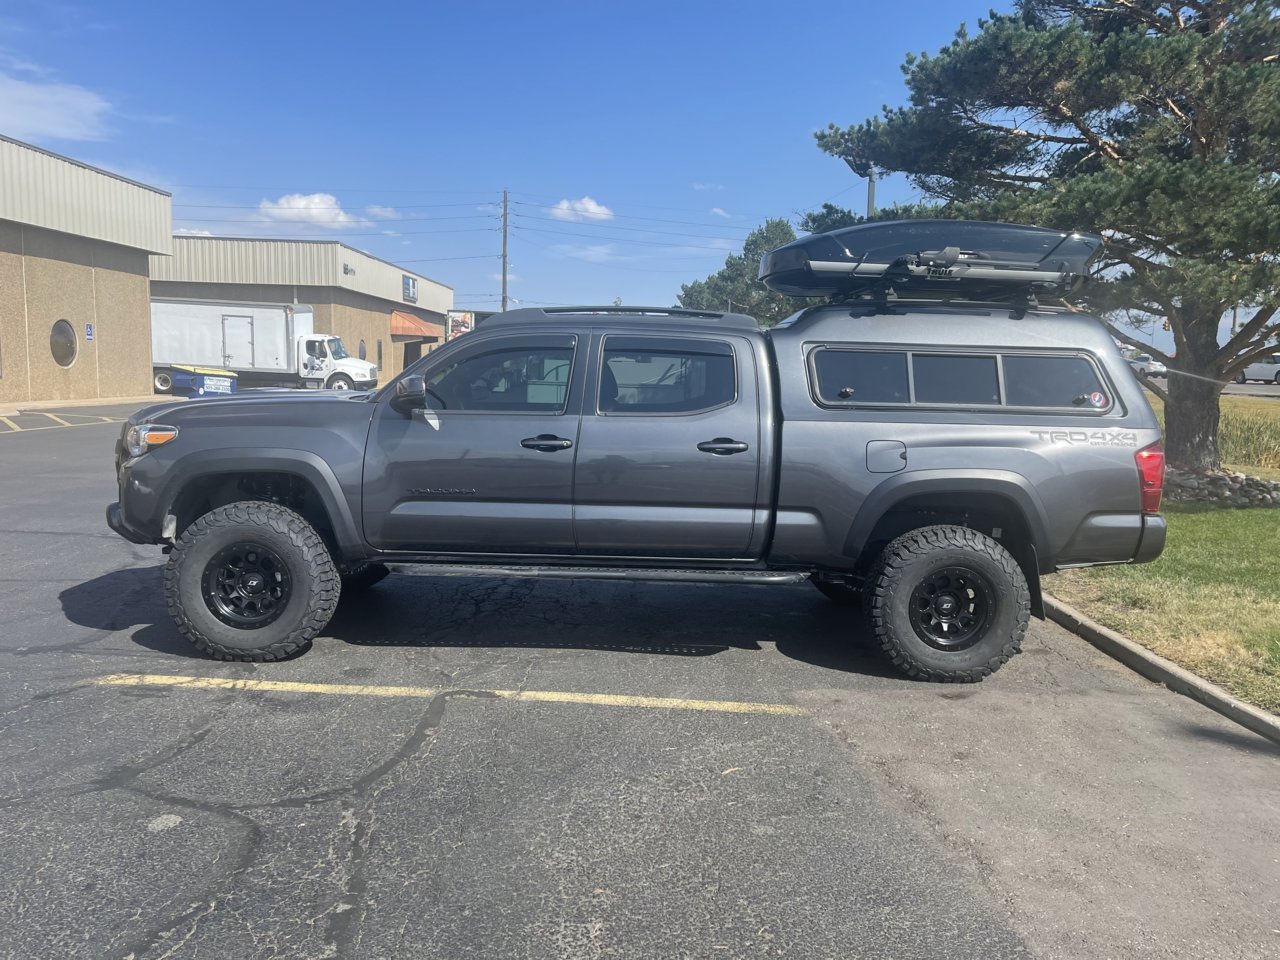 Show off your 285/75R16 | Tacoma World